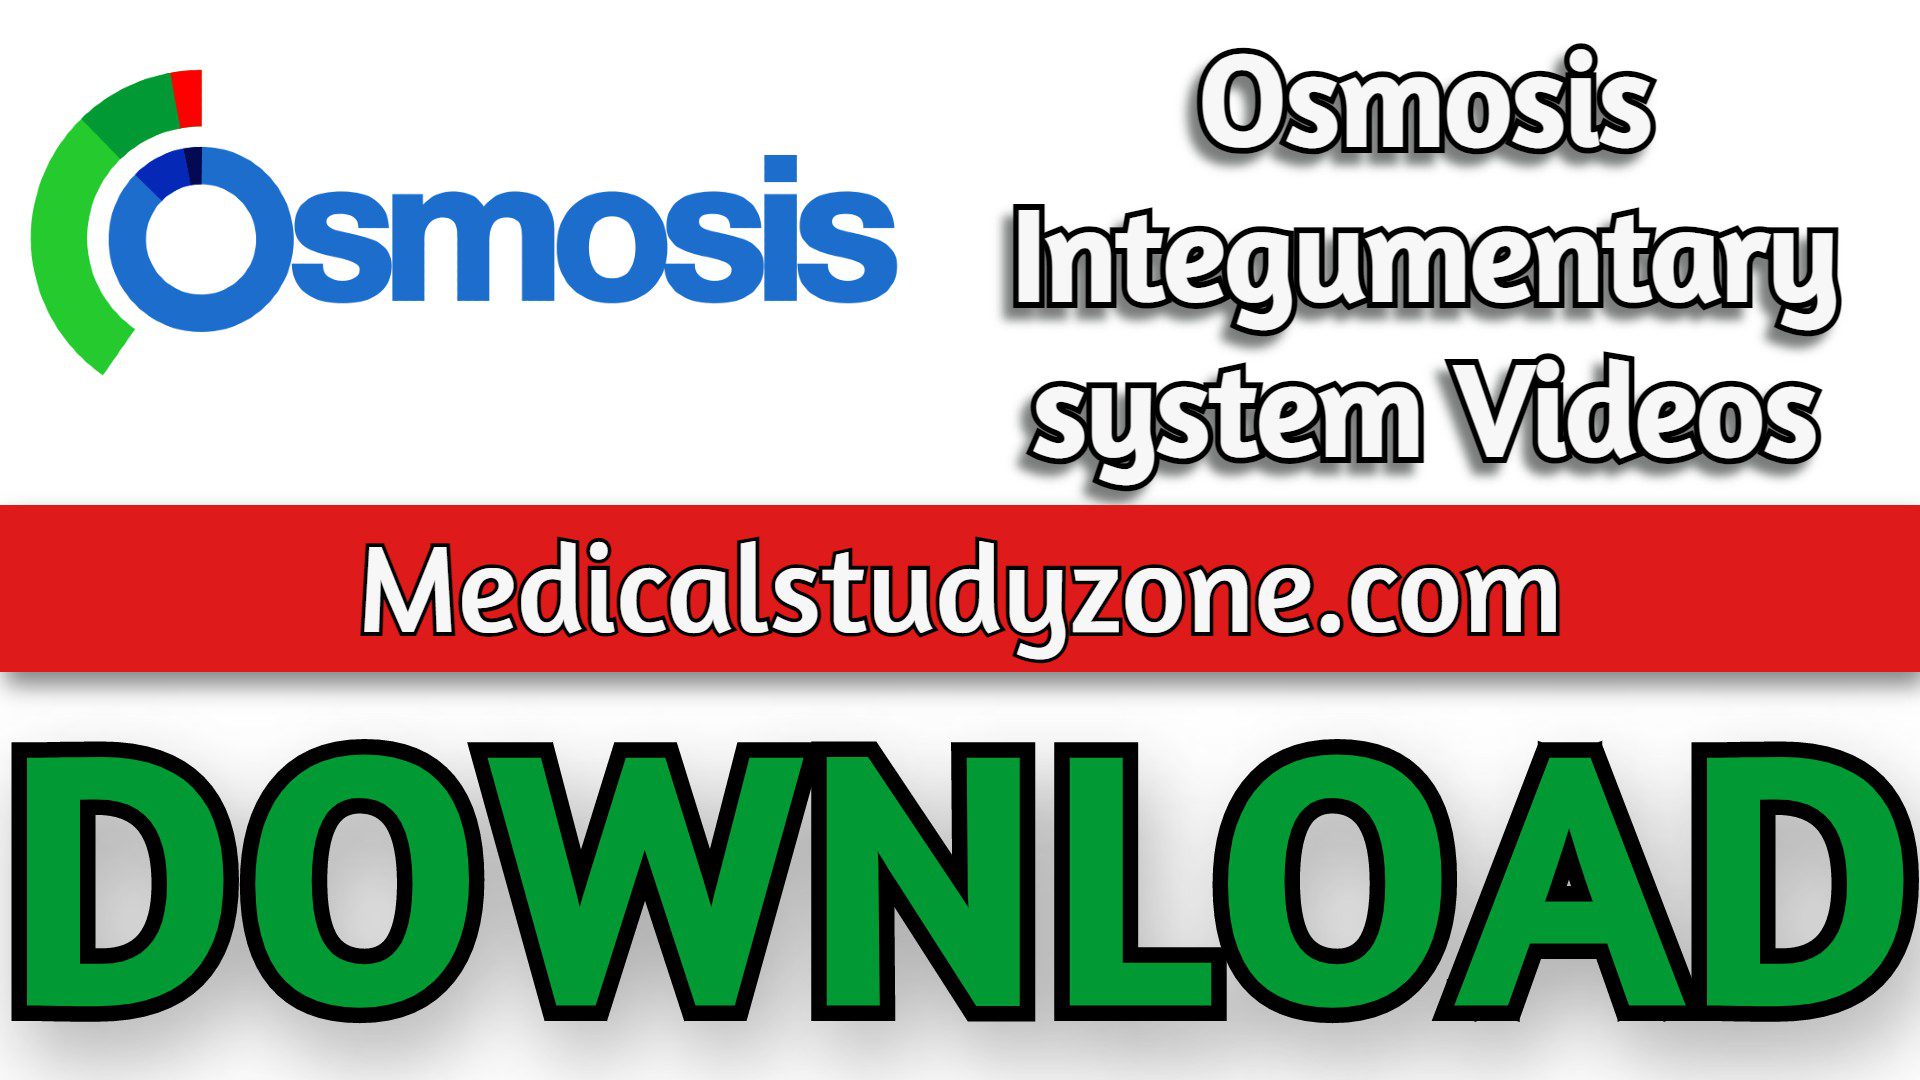 Osmosis Integumentary system Videos 2022 Free Download